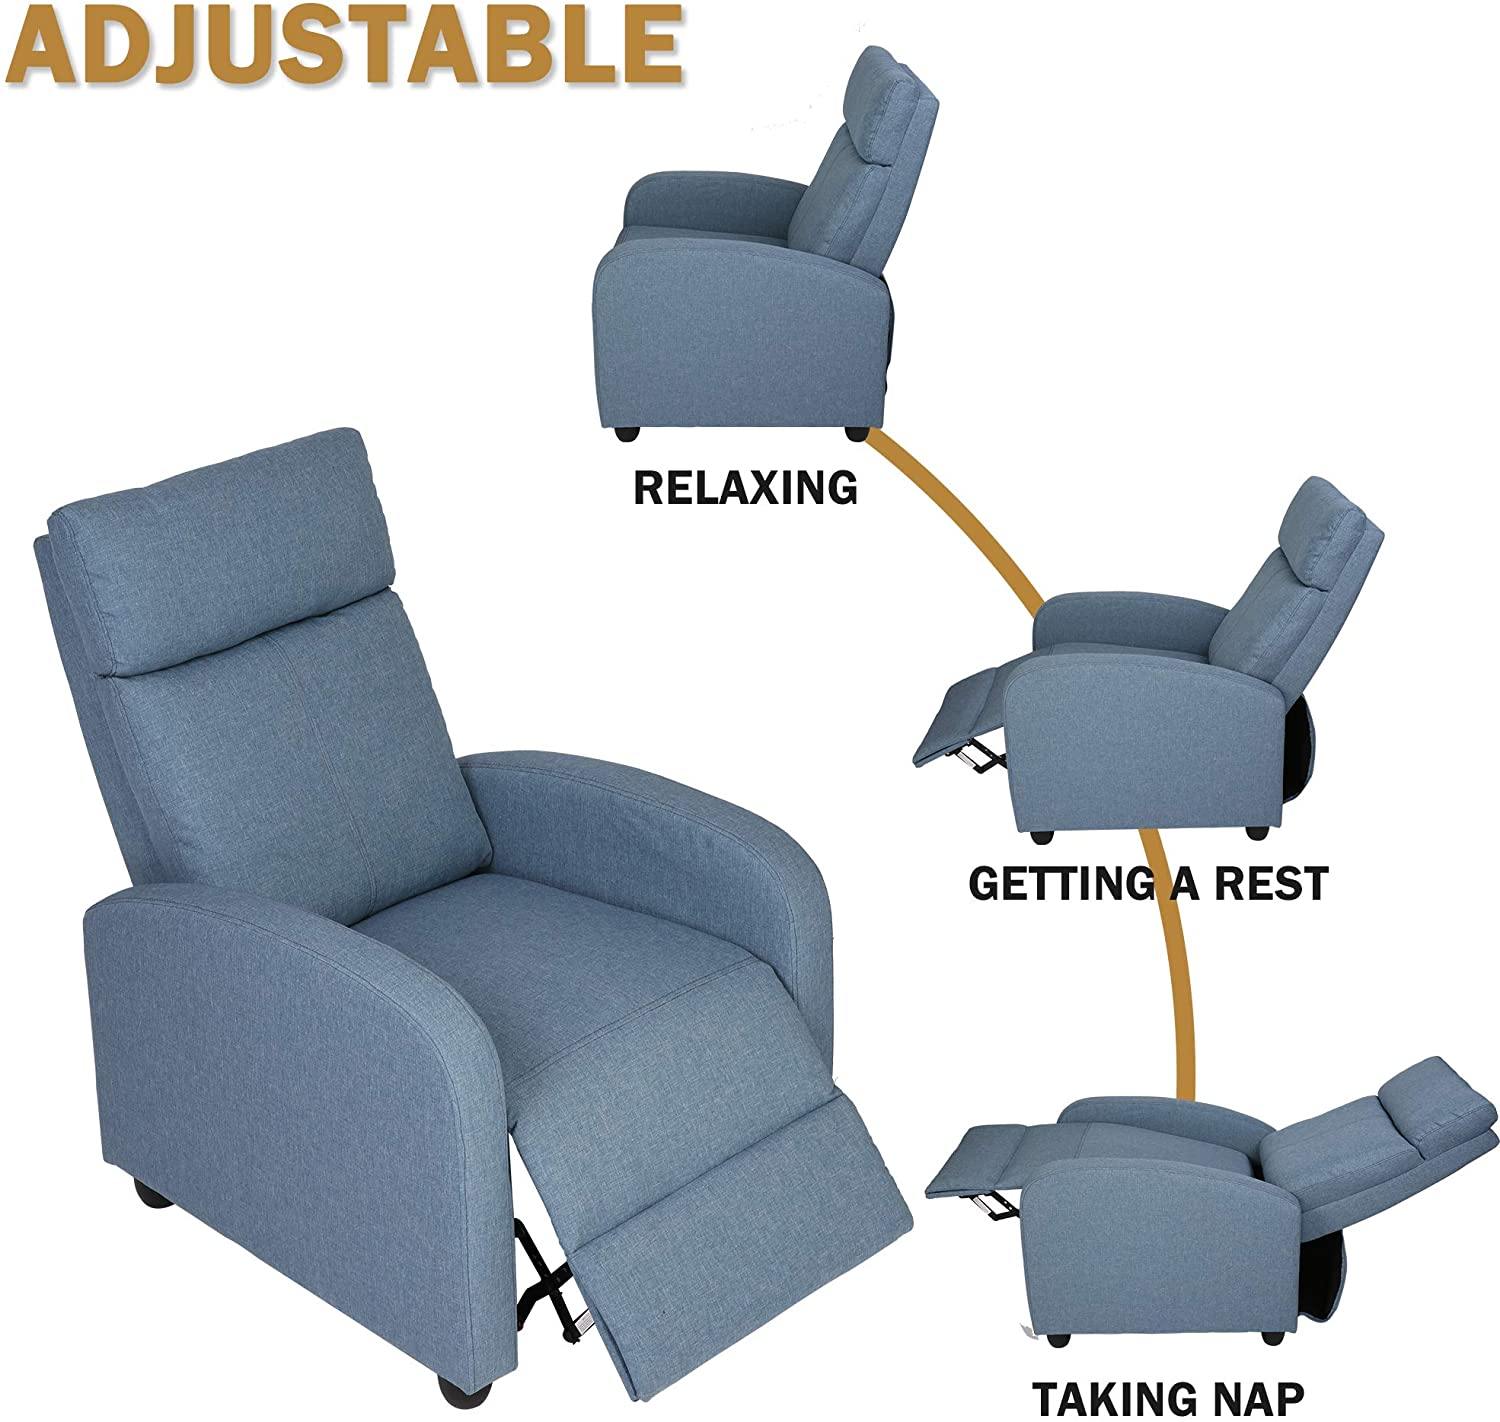 Fabric Recliner Chair Adjustable Single Sofa Home Theater Seating Recliner Reading Sofa for Living Room & Bedroom, Blue - Bosonshop